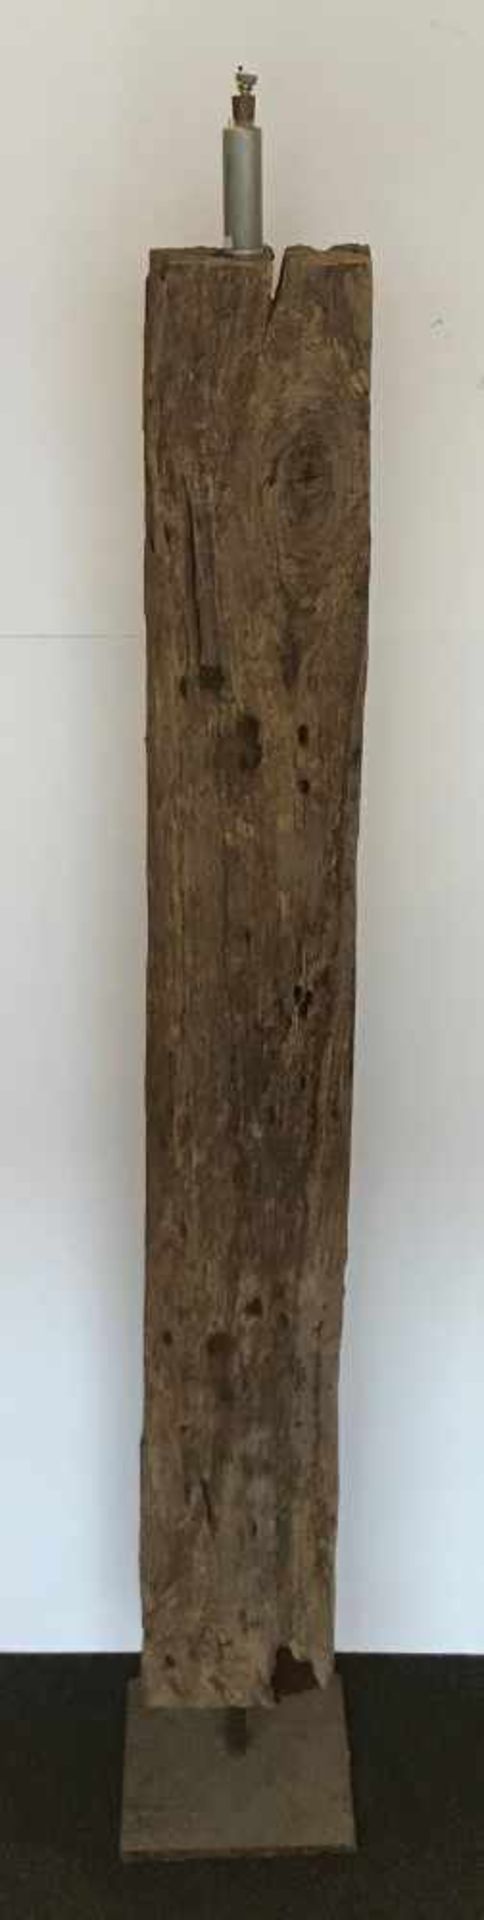 Congolese wooden train trackon metal standL 123 cm